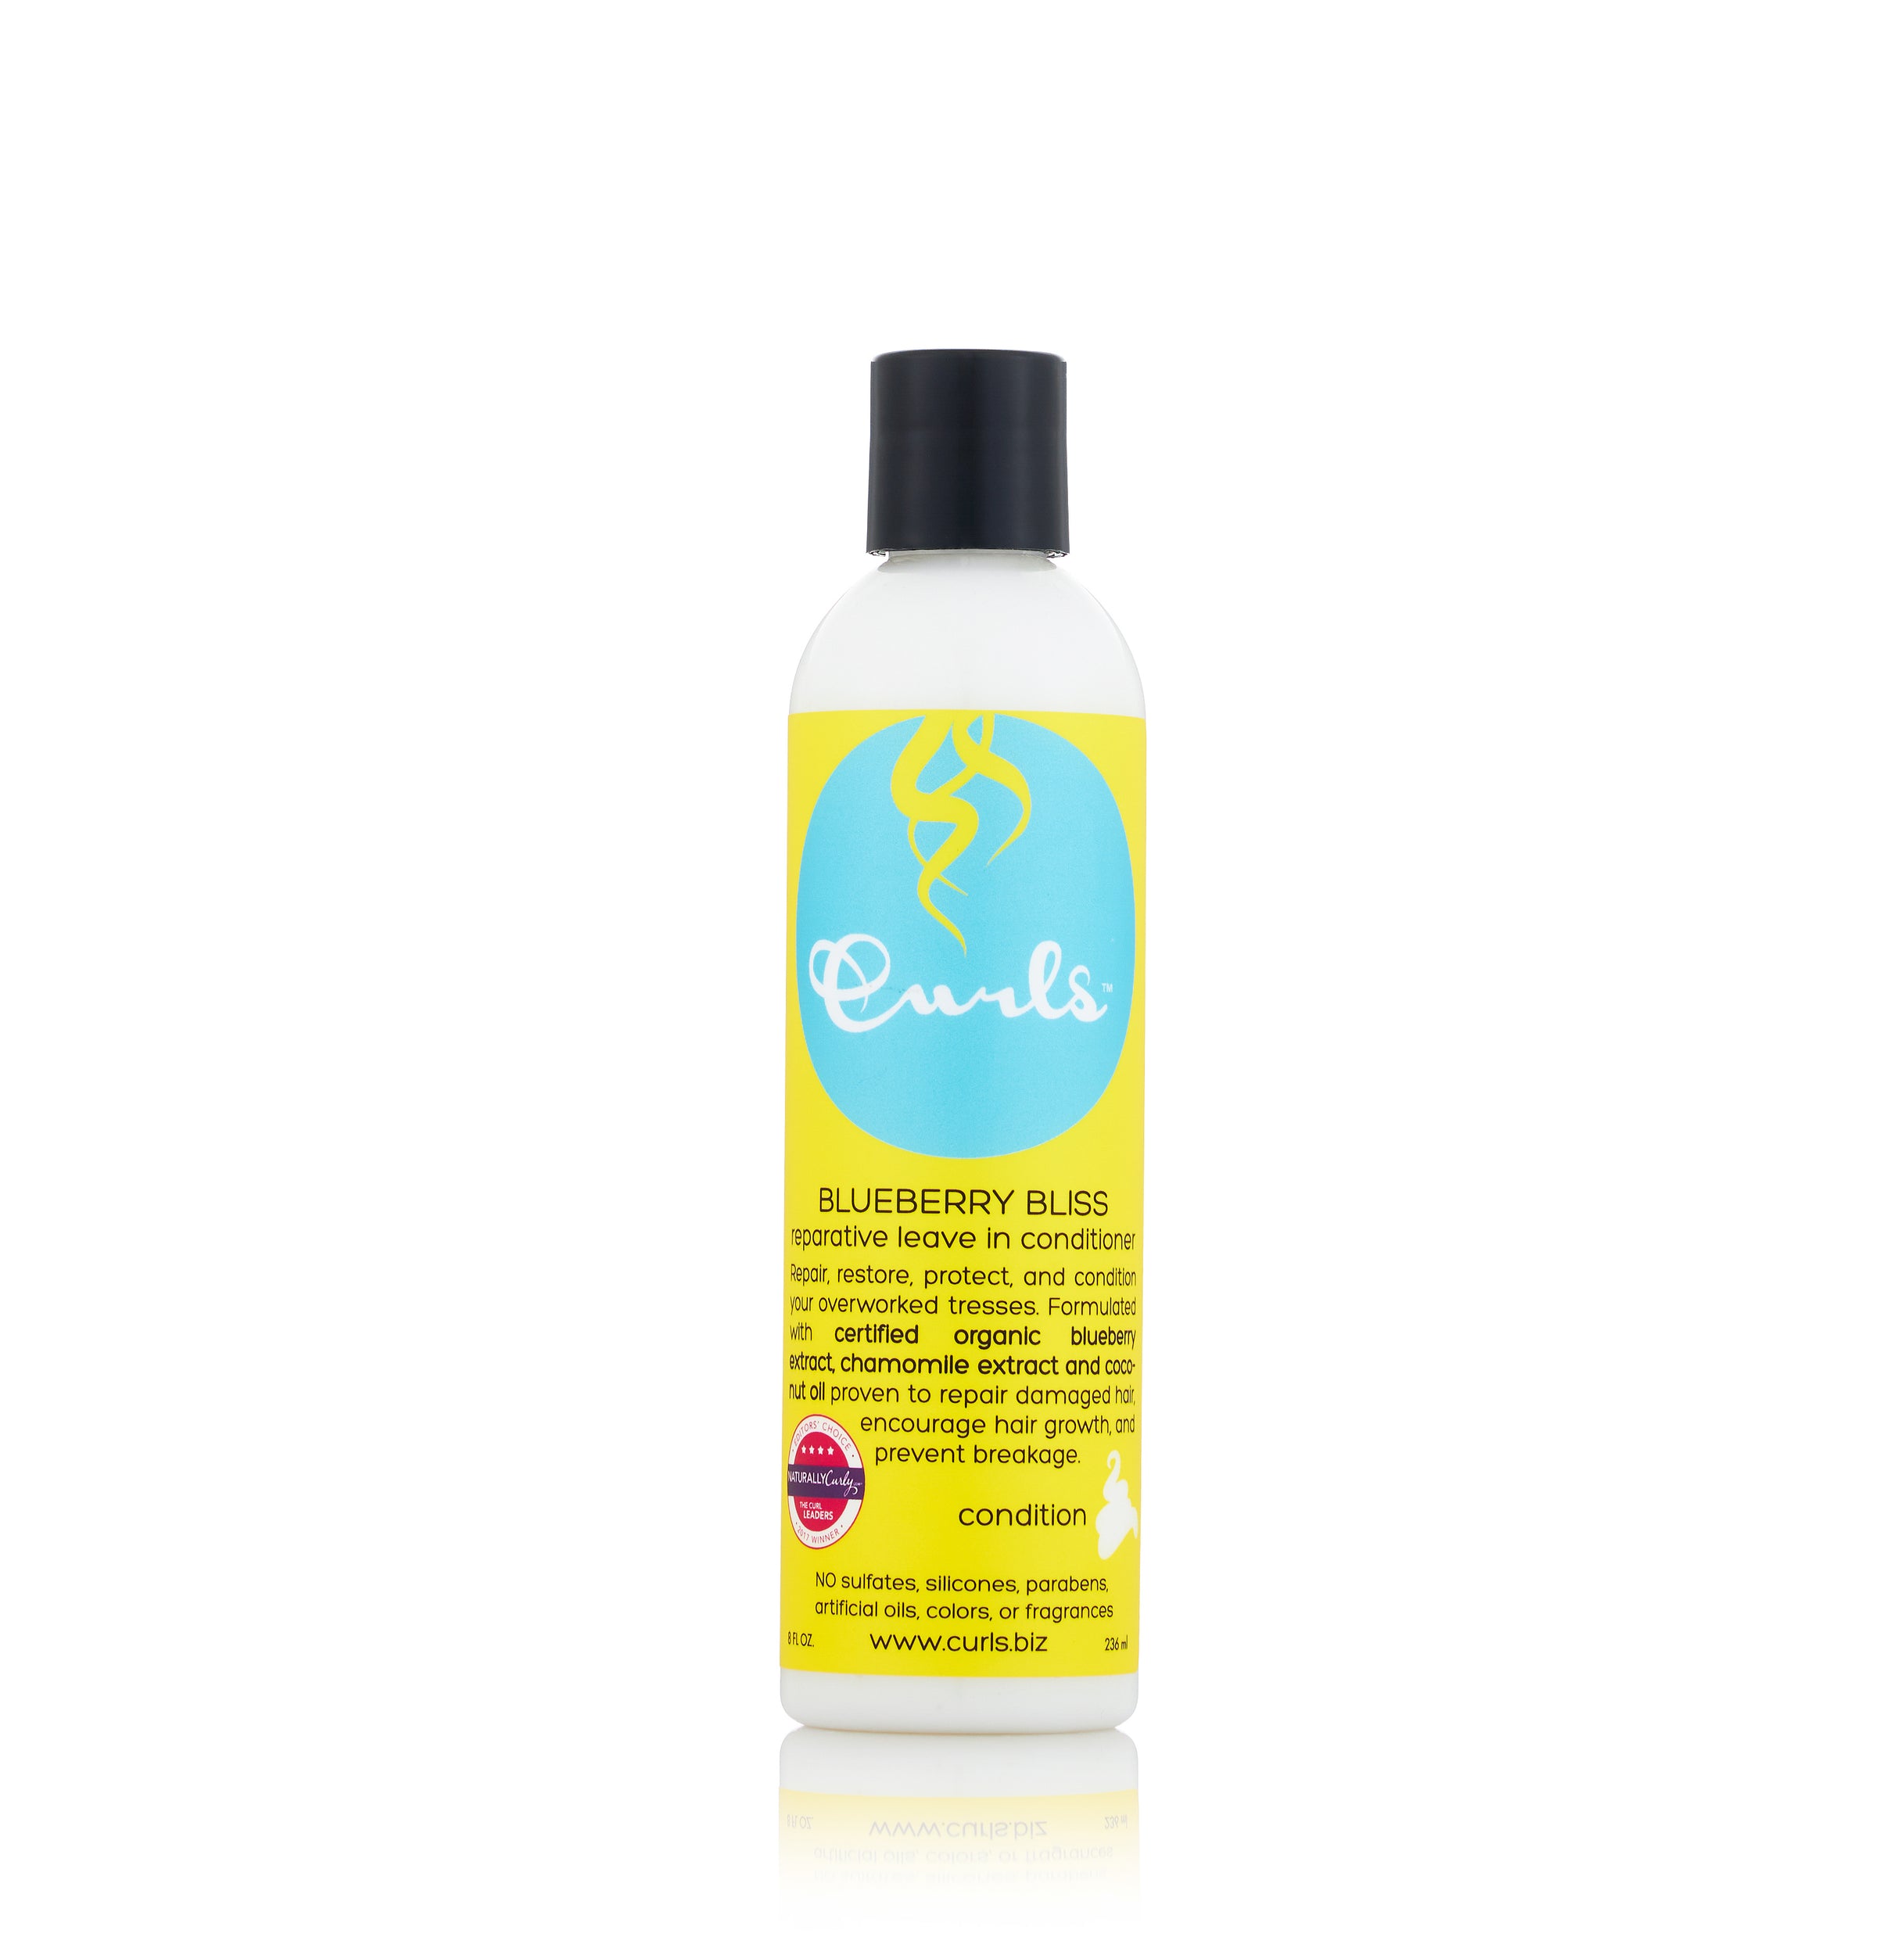 Blueberry Bliss Reparative Leave-in Conditioner